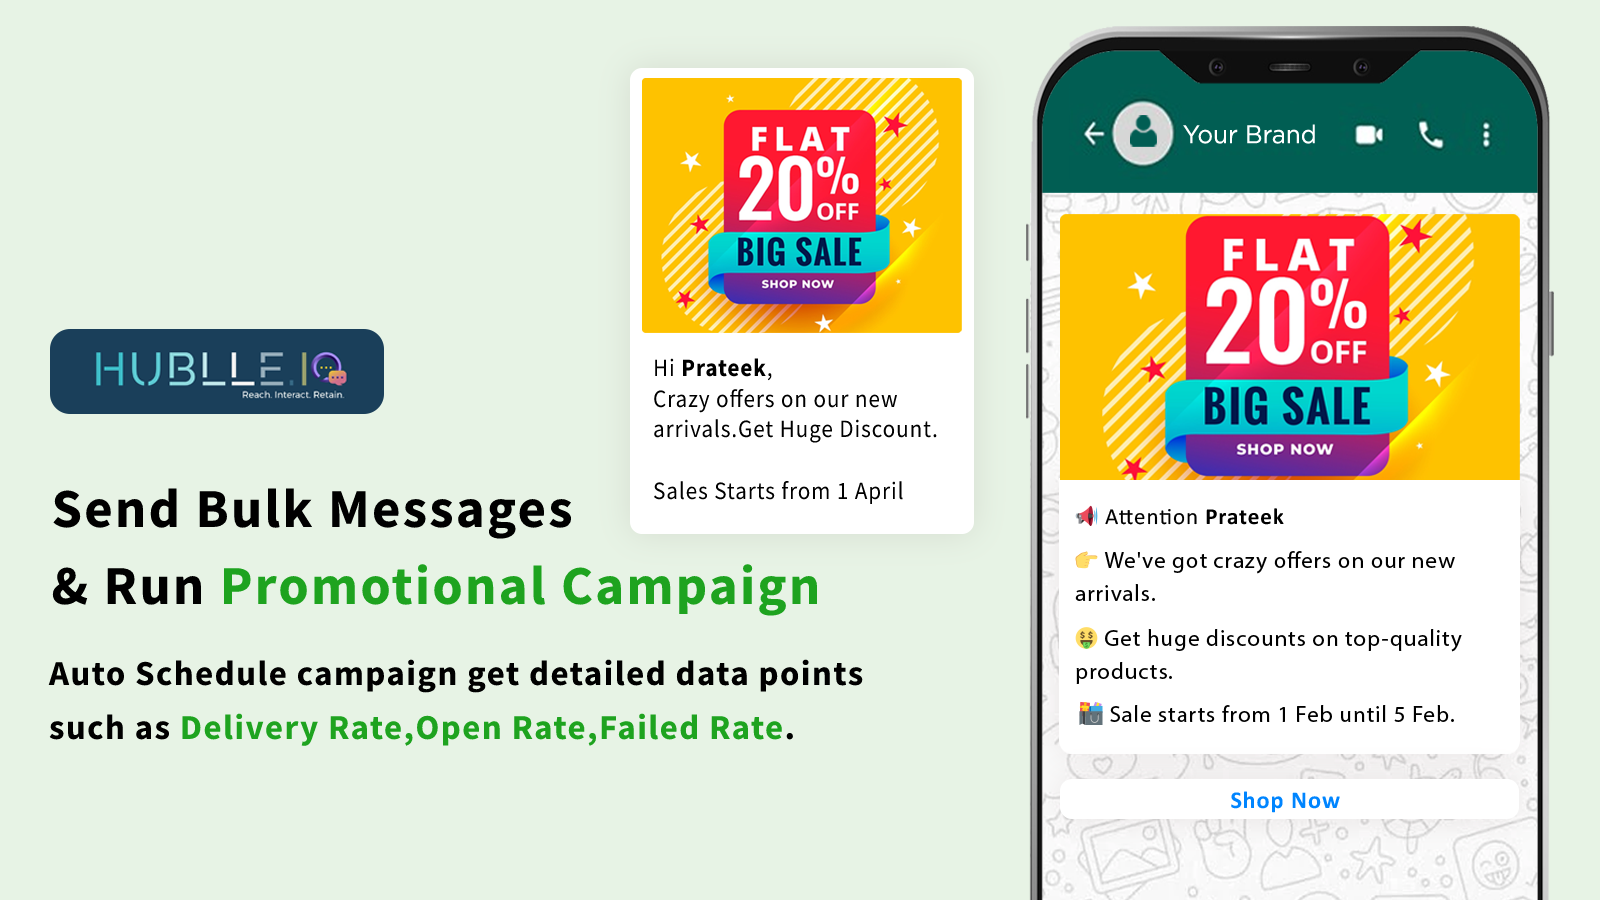 Schedule Promotional Campaign & get detailed data points.